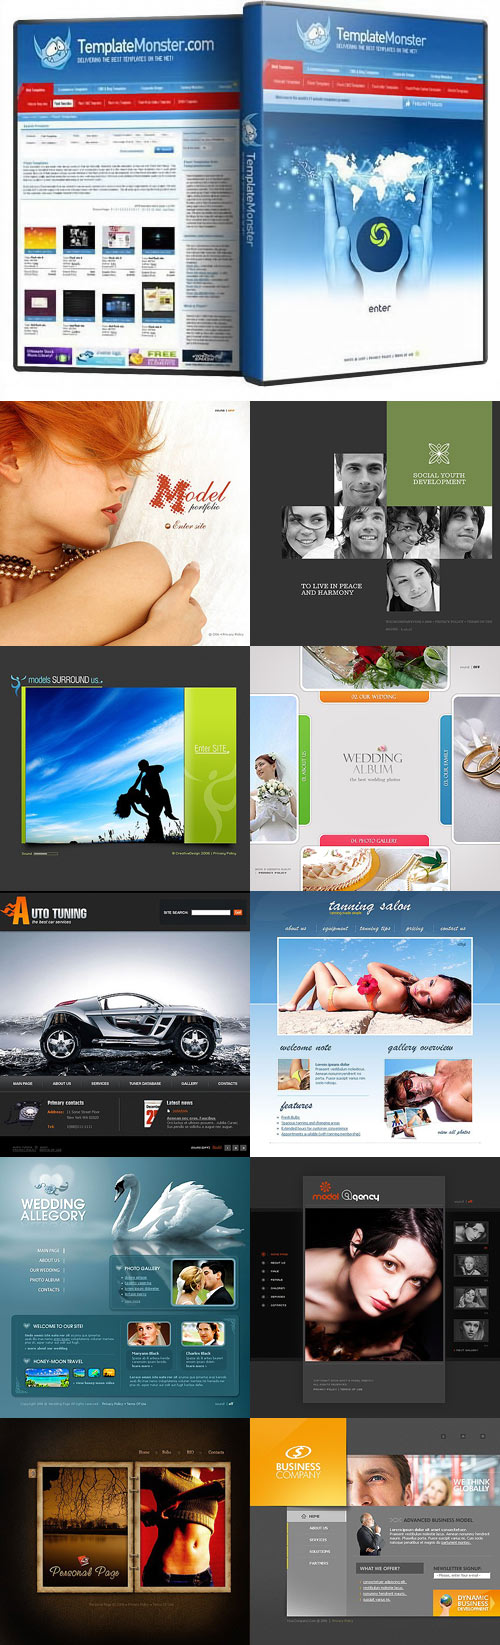 Template Monster Site Collection 12000